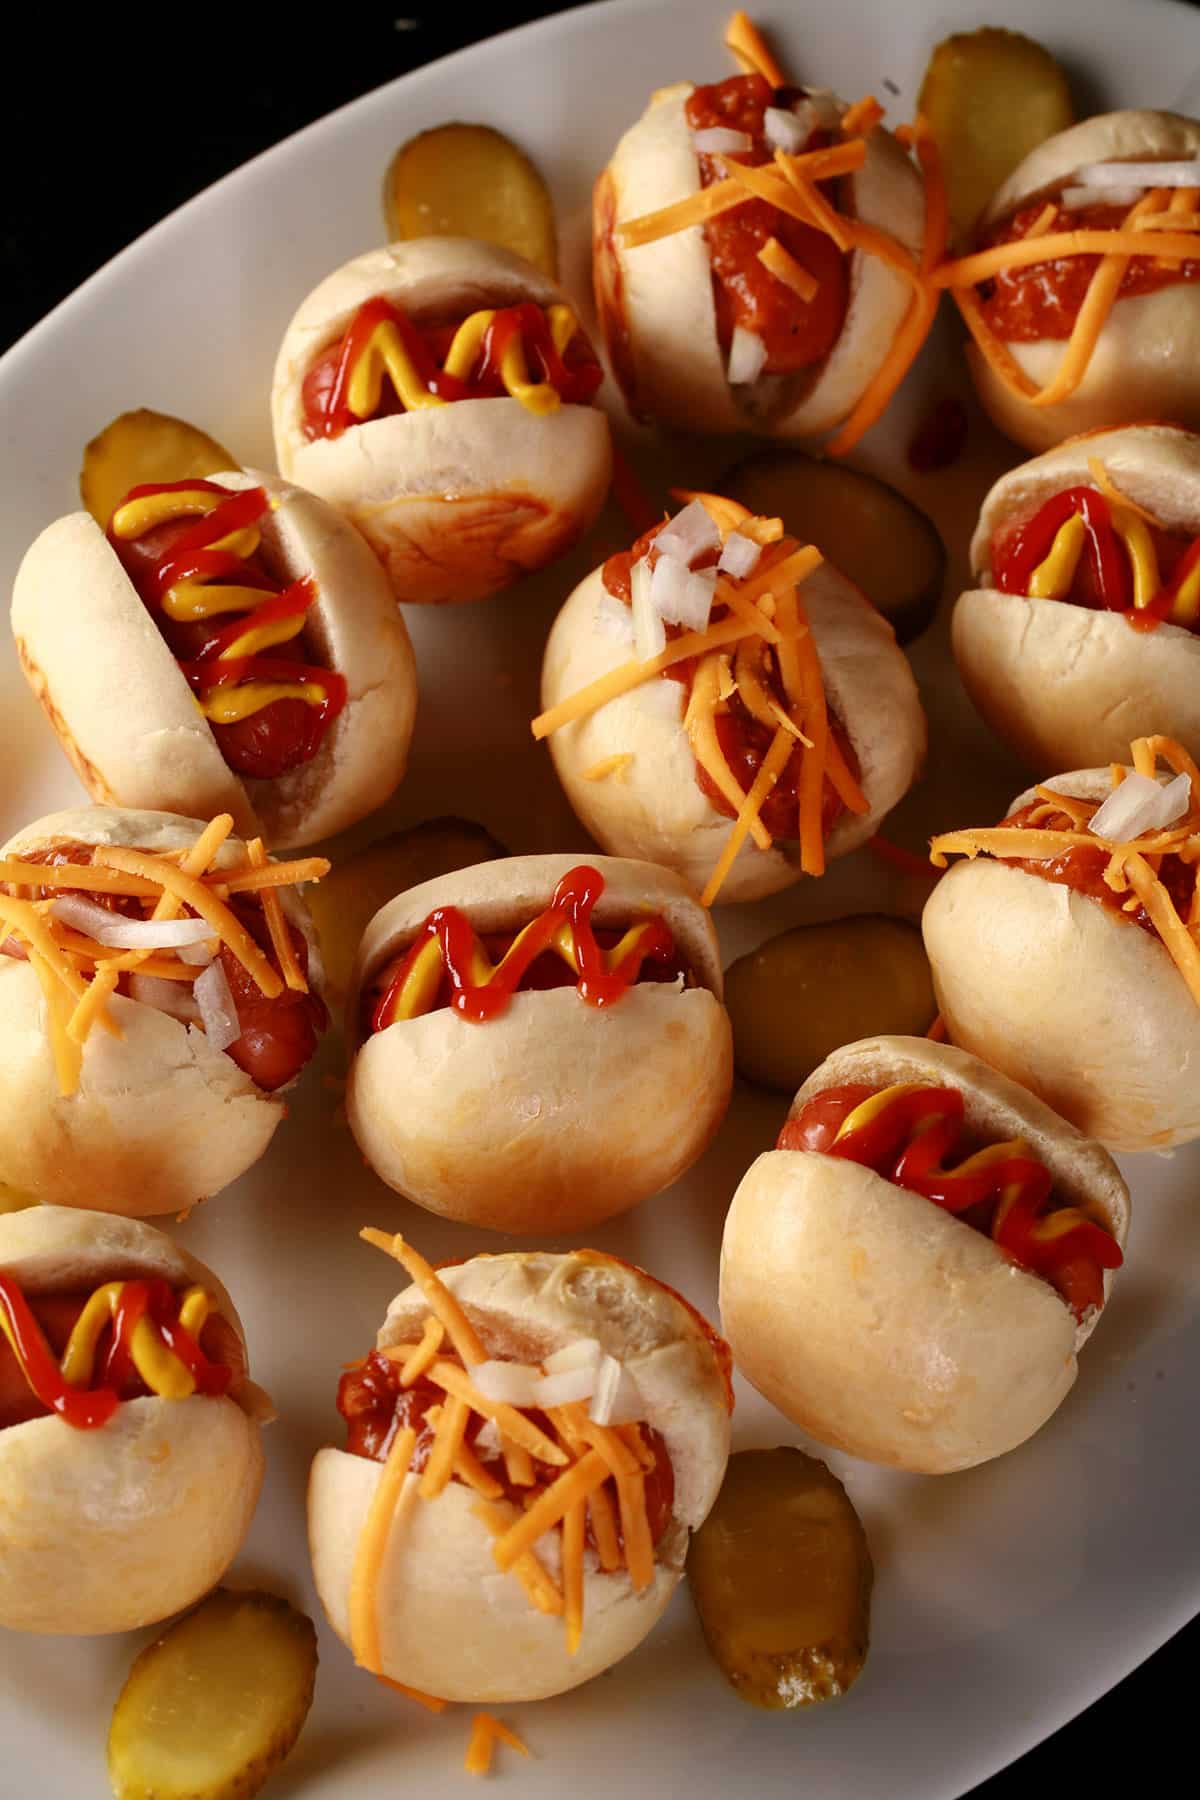 A plate of hot dog sliders, with cheese, hot dog, ketchup, and chili toppings.